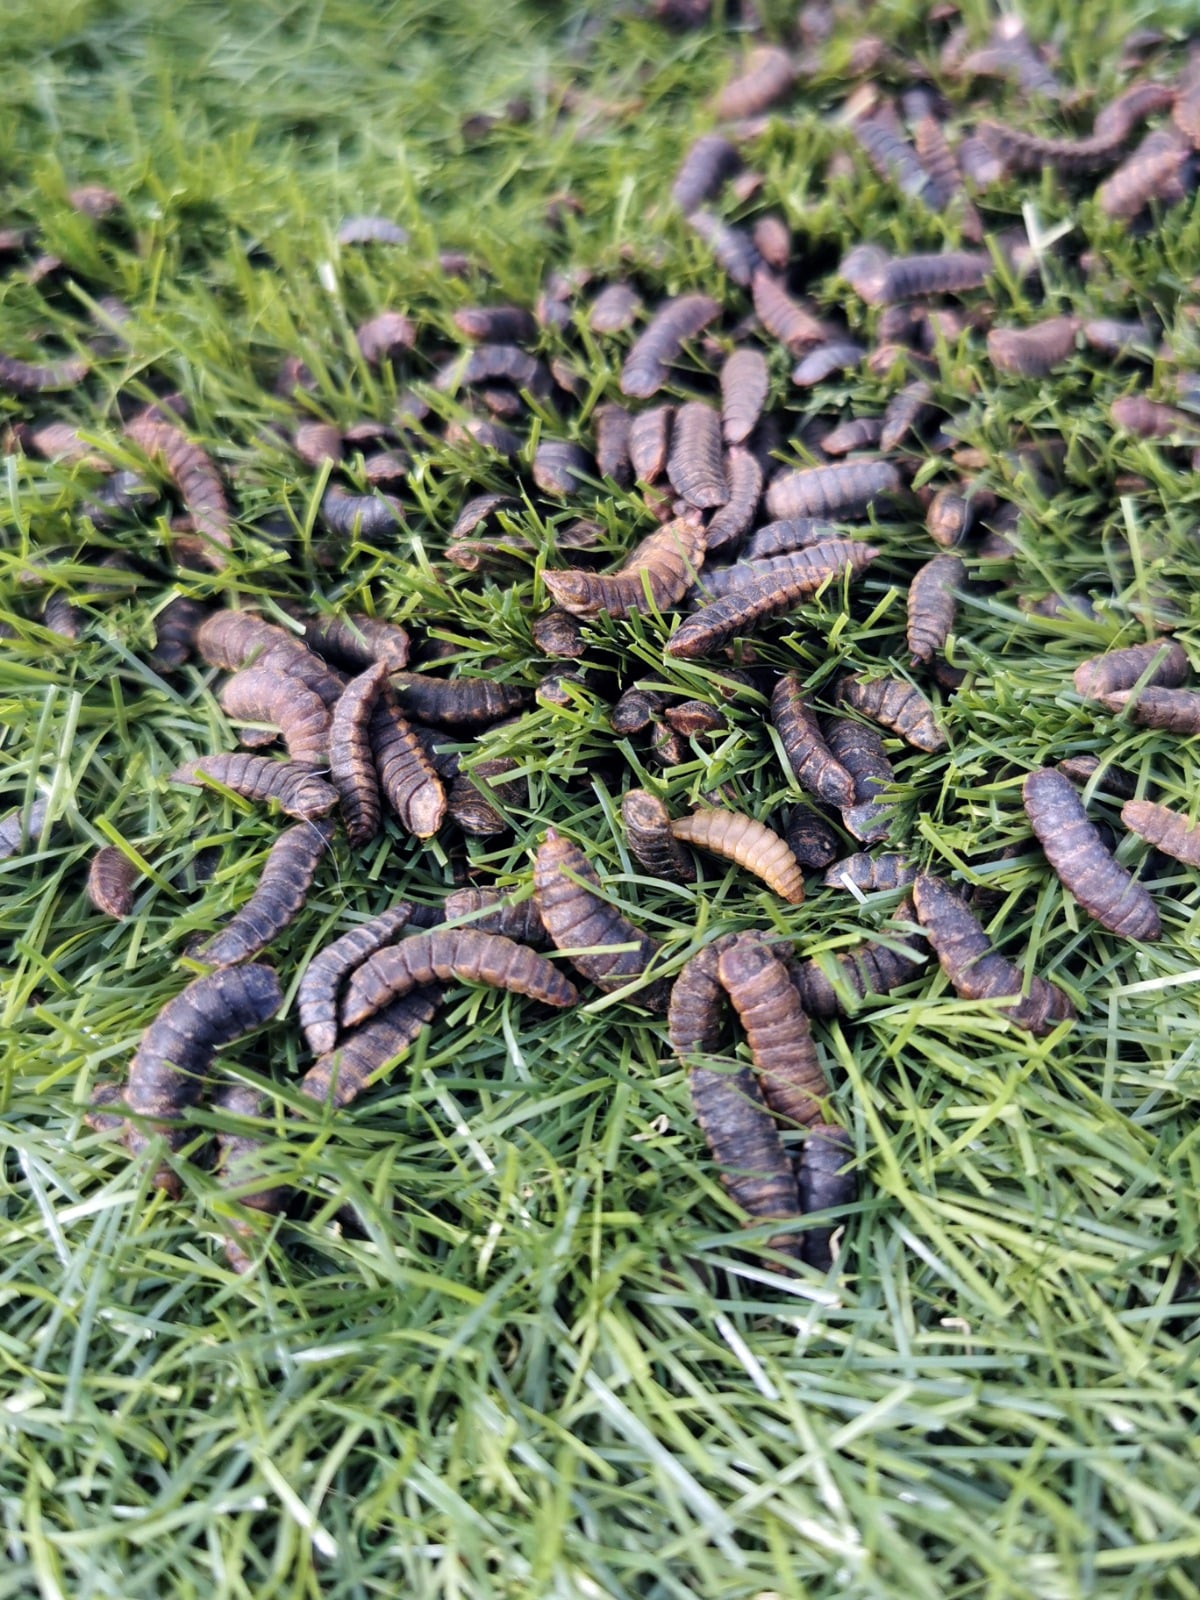 scattered live black soldier fly larvae aka calci worms